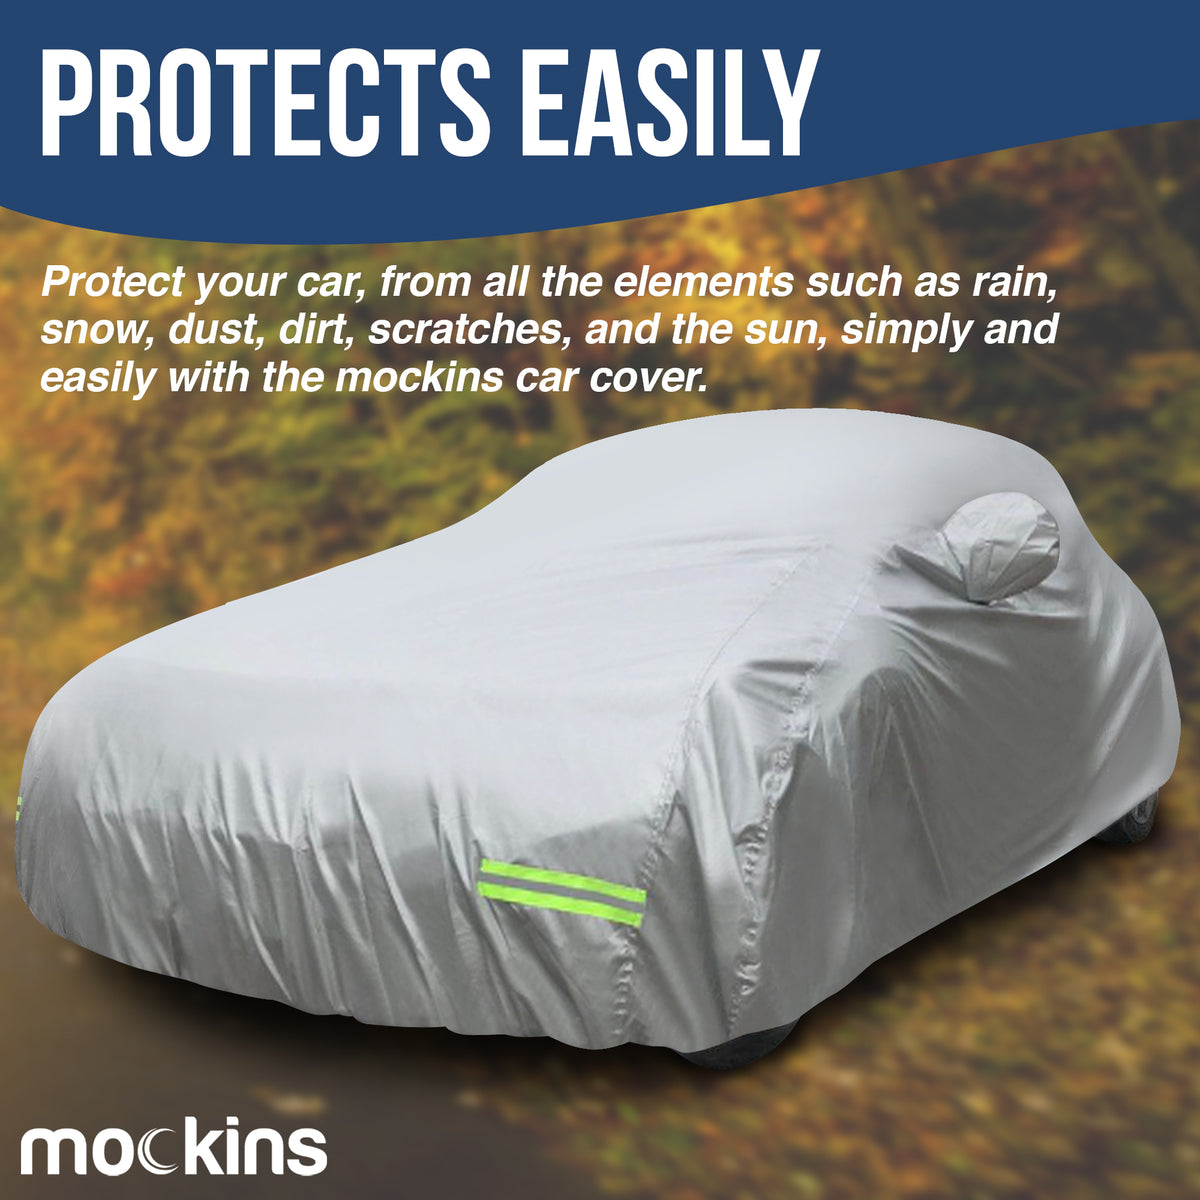 Mockins Waterproof Car Cover Protects Your Car From All Outdoor Weather Conditions